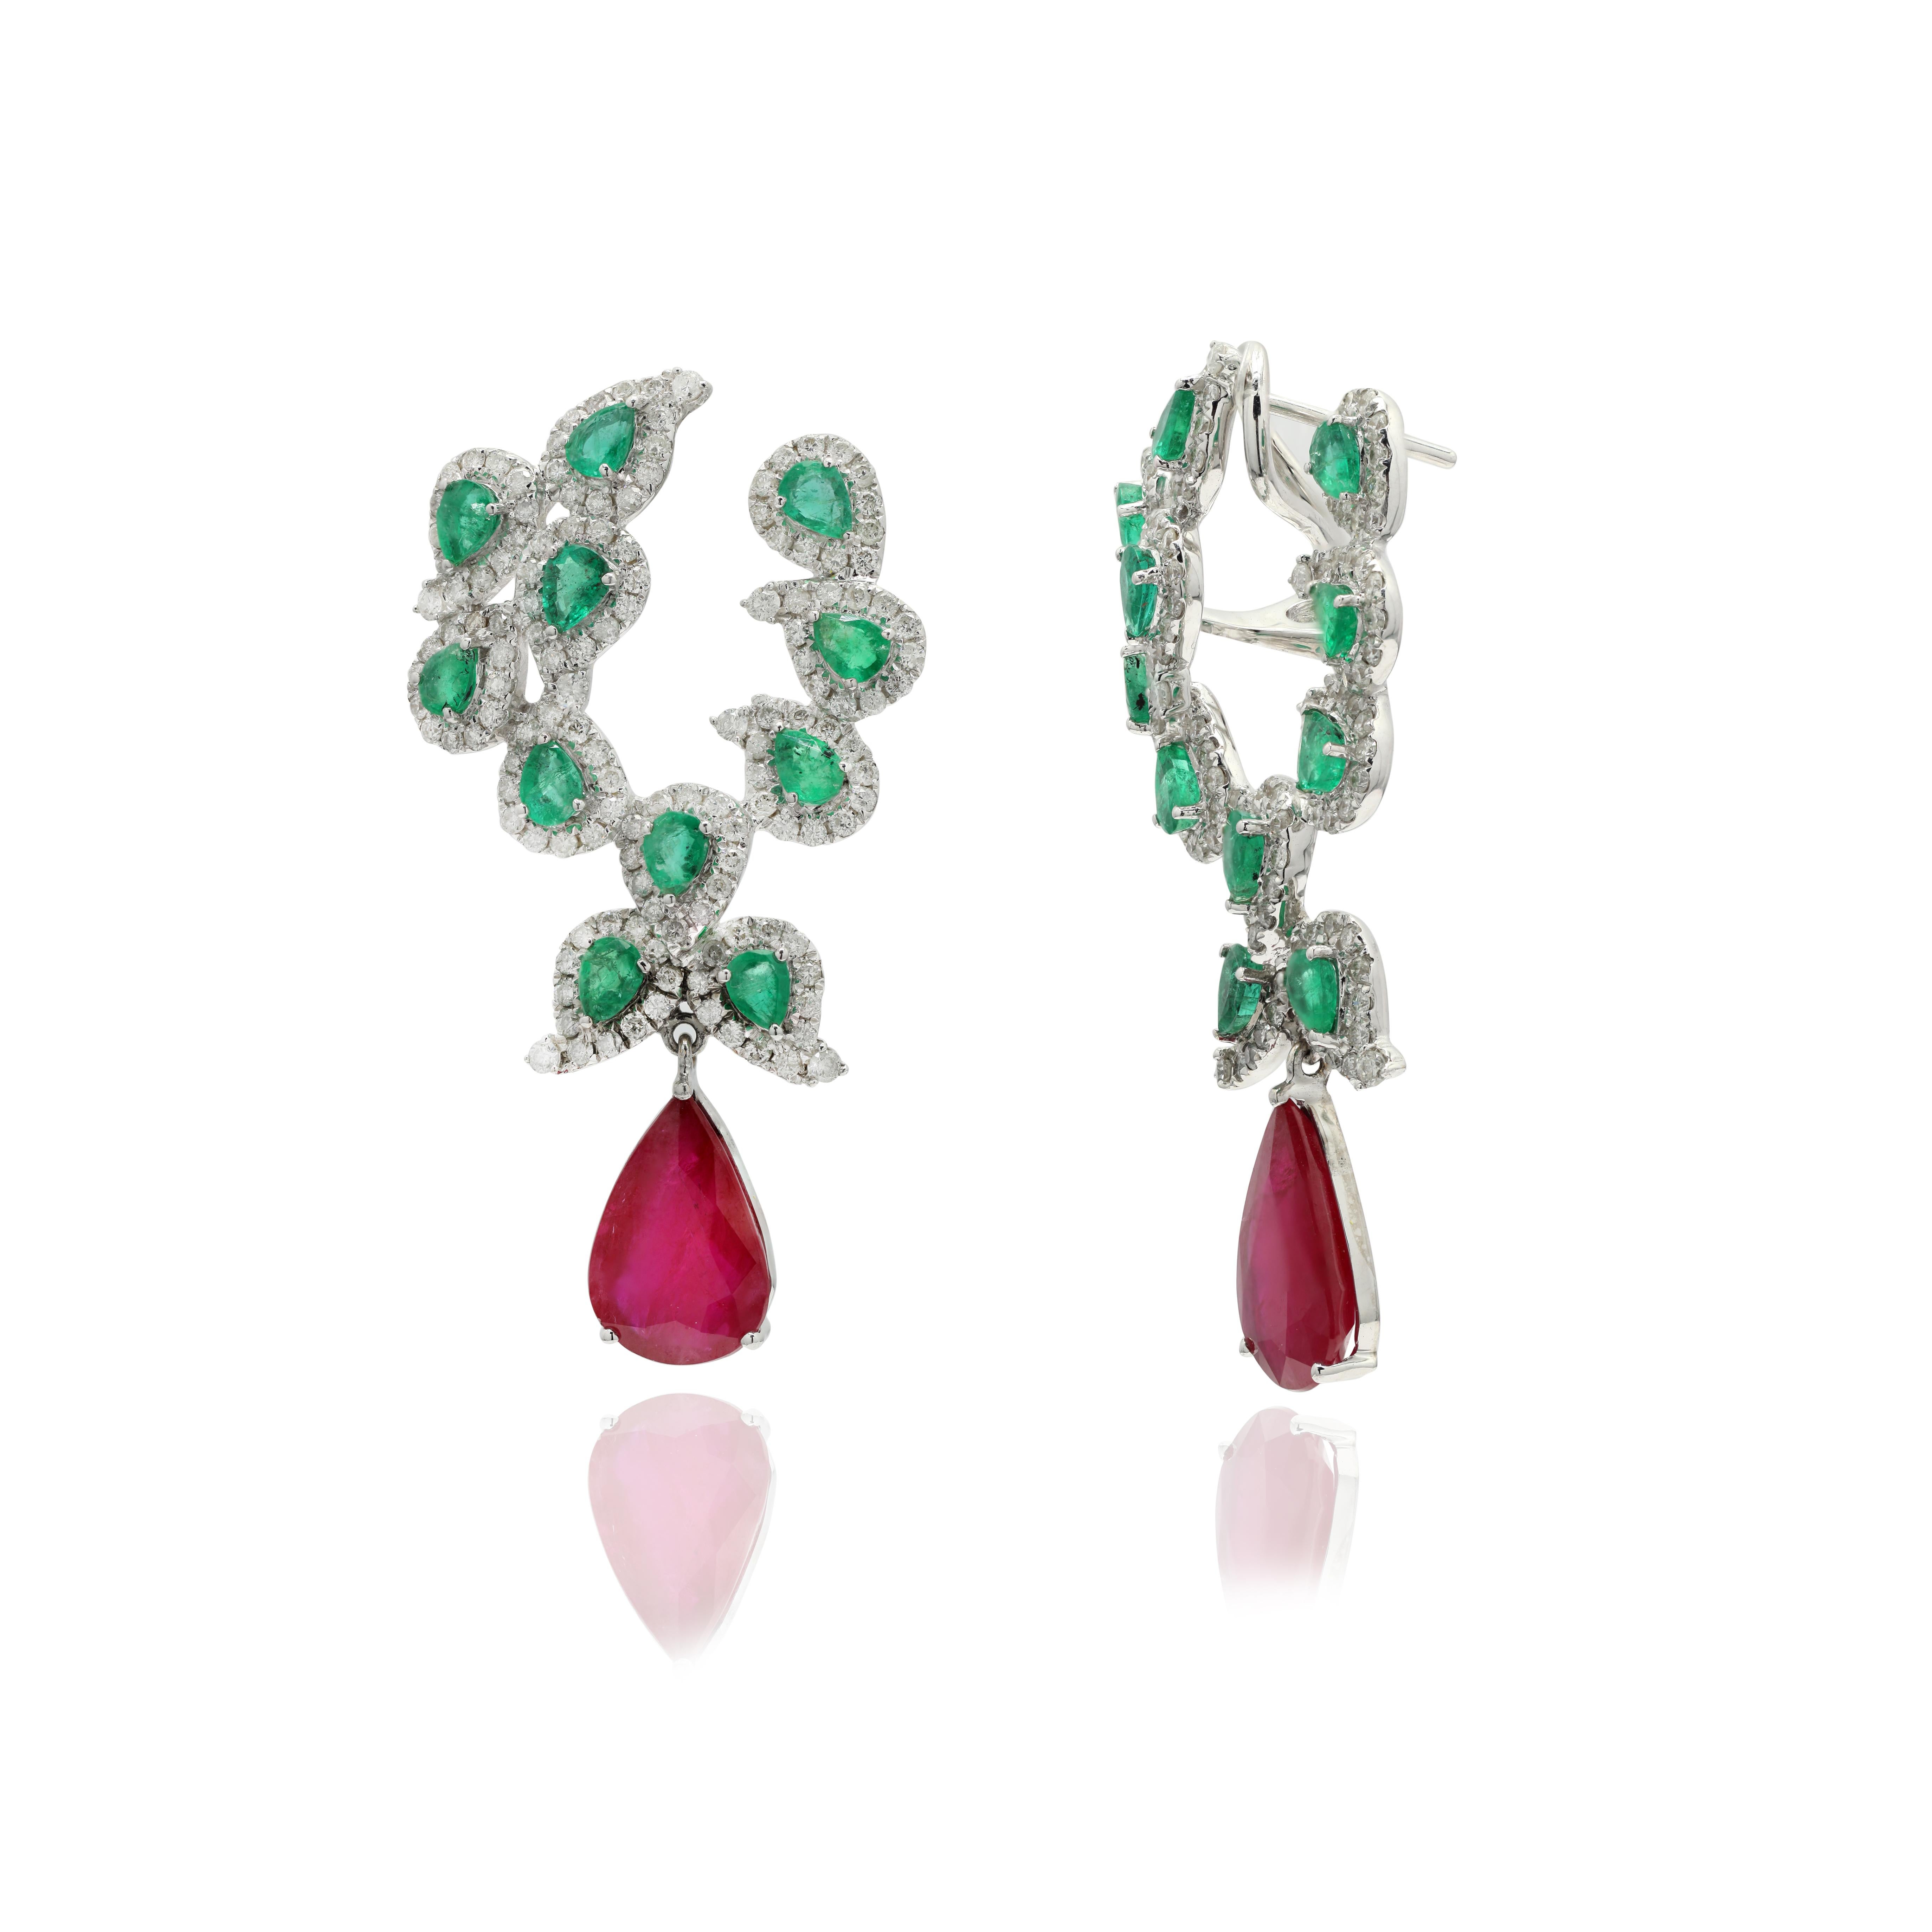 Art Deco 14K White Gold 10.04 ct Emerald & Diamond Paisley Earrings with Dangling Ruby For Sale